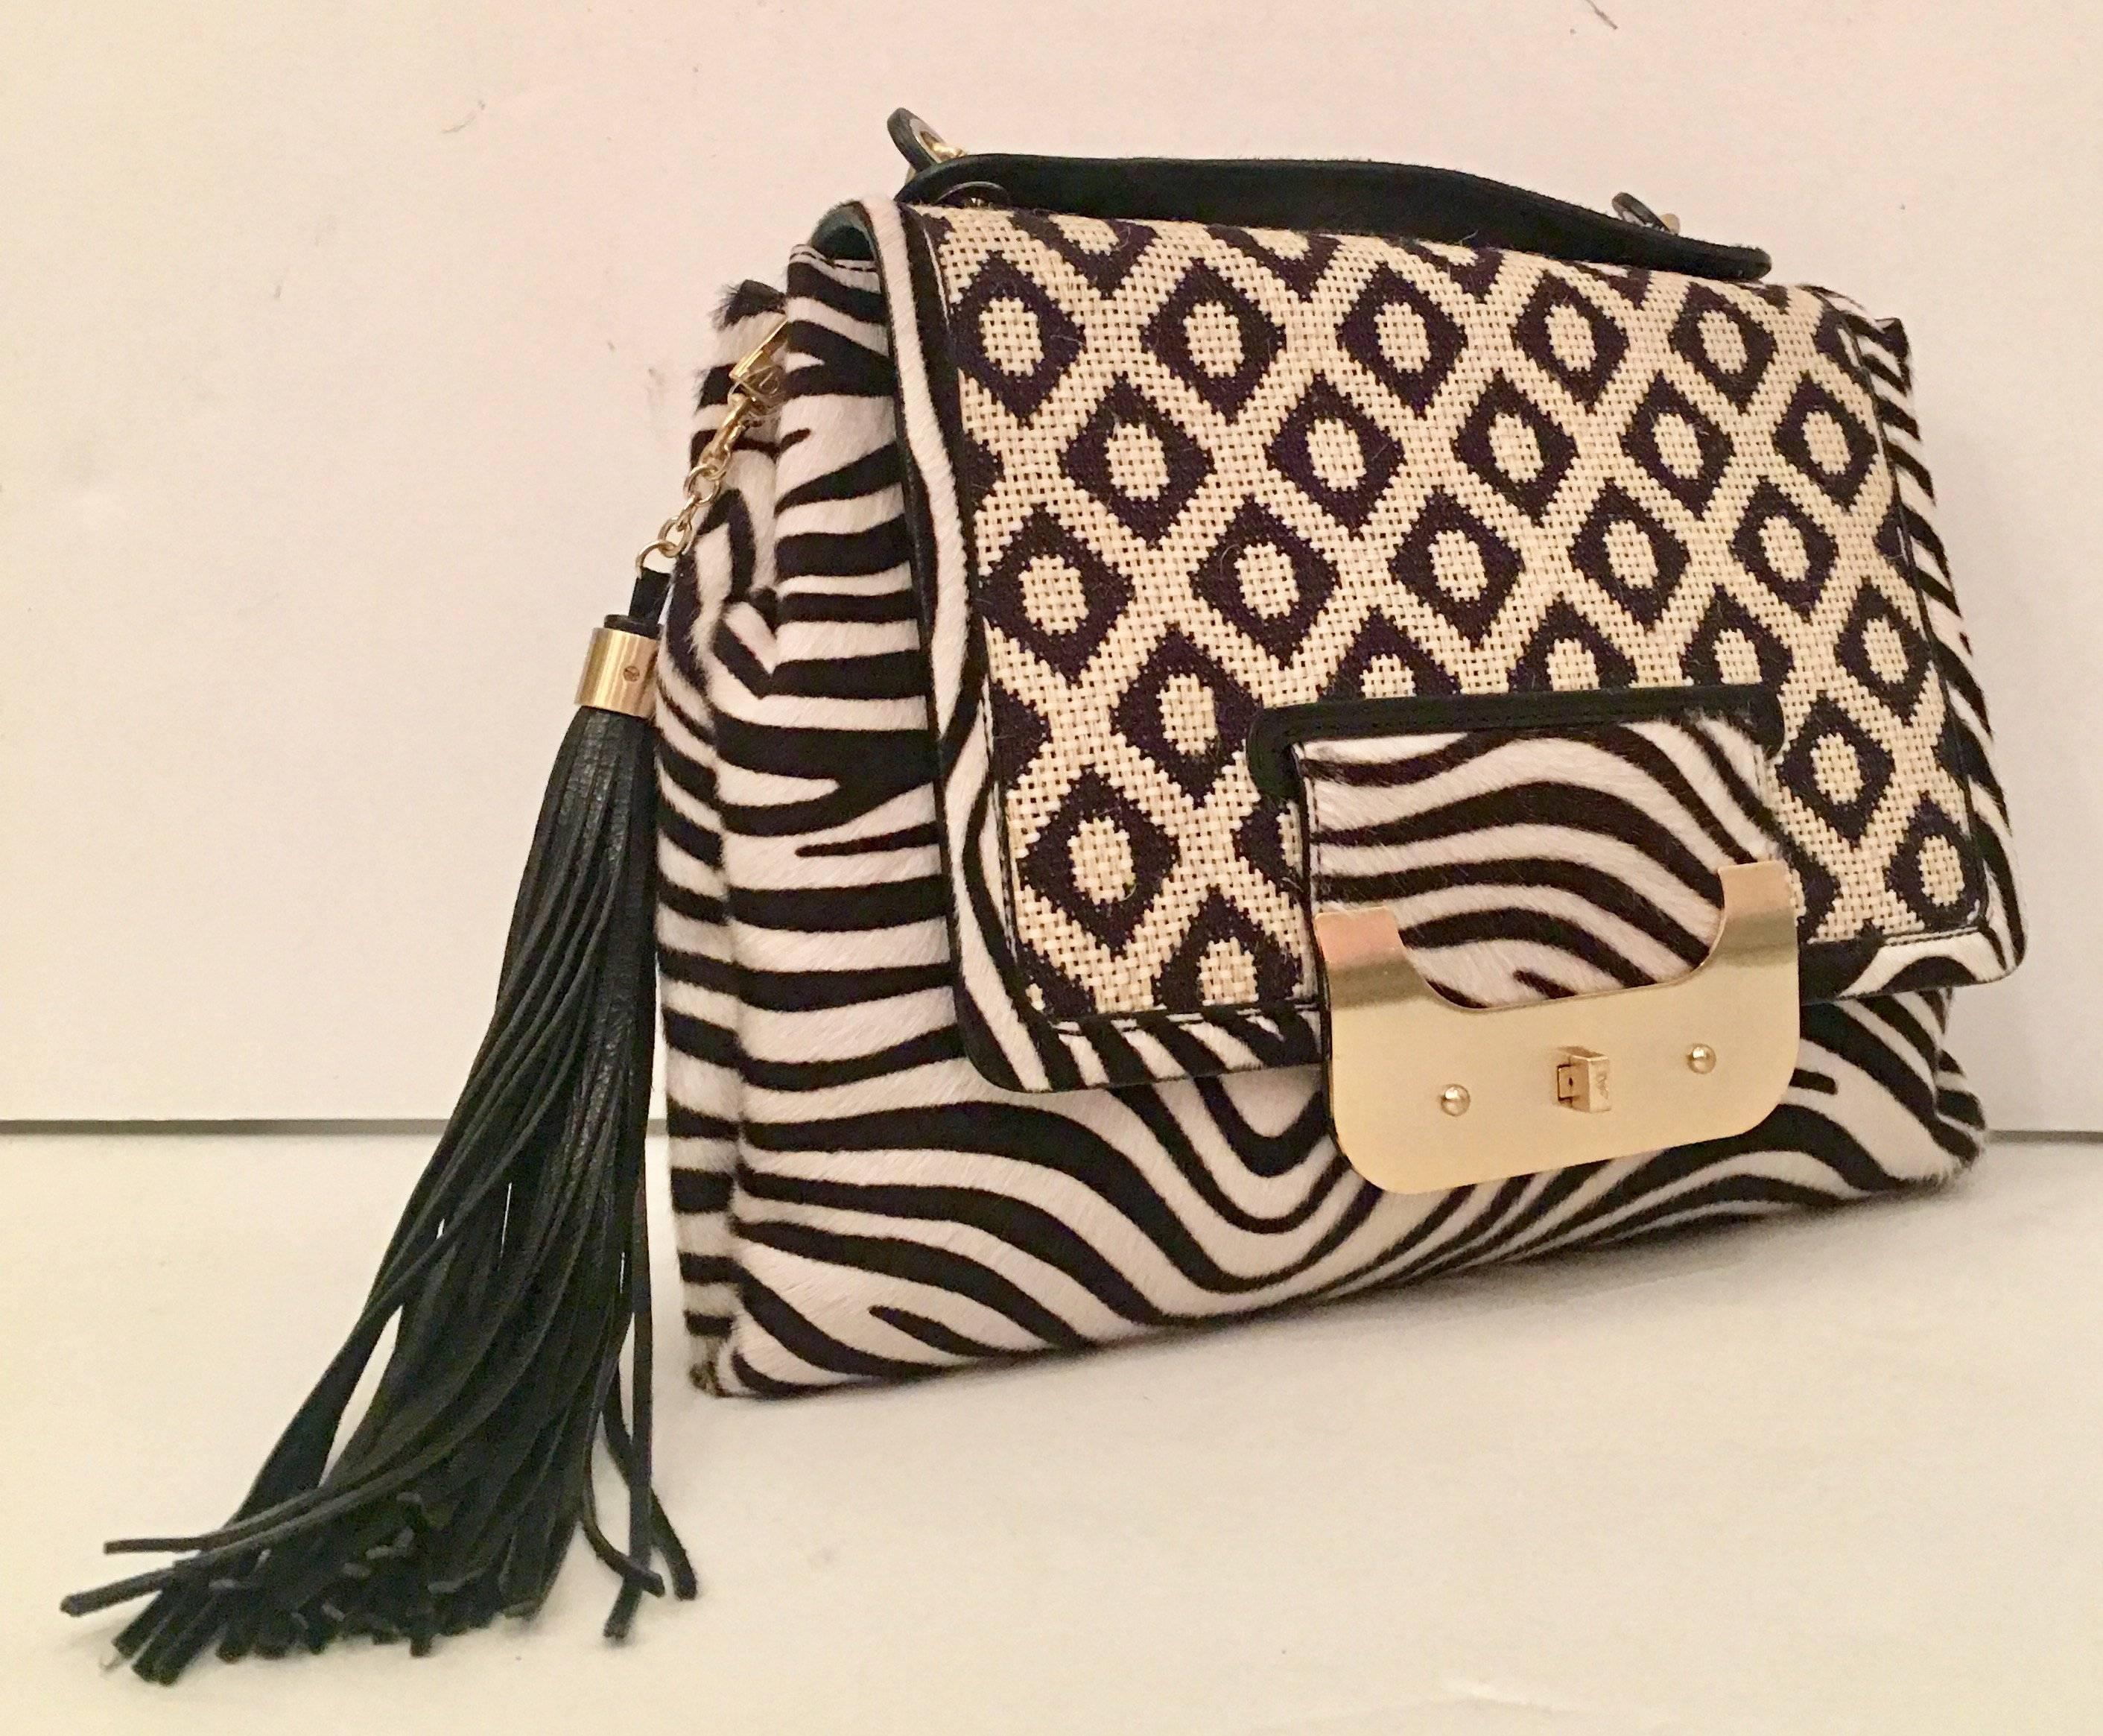 2012 collection limited edition "Harper" large cross boy black and white hand bag. This stylish hand bag features, authentic hide hair in a zebra print with geometric print cruel front flap detail and a leather tassel ornament. Hardware is